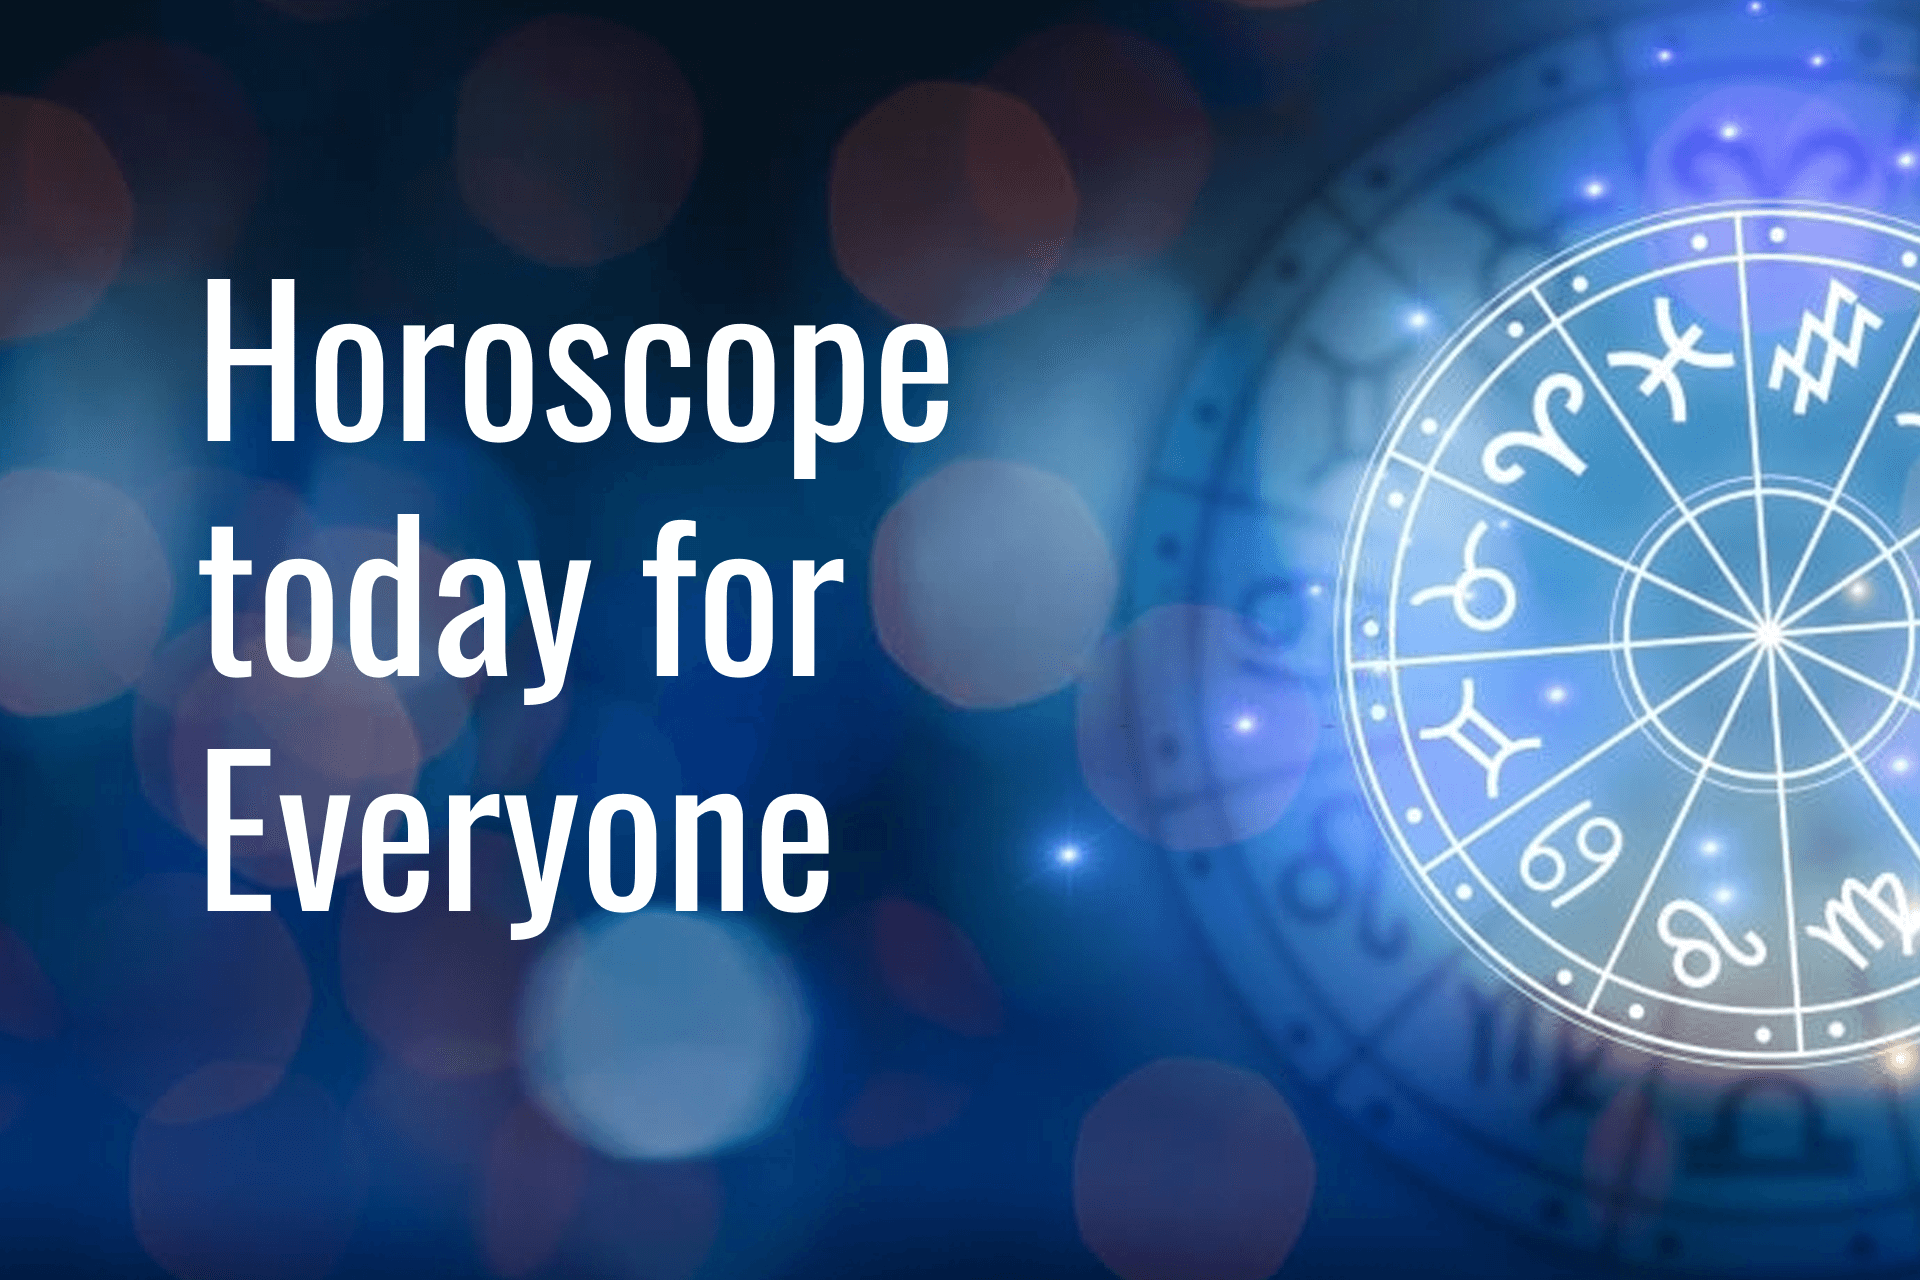 Want An Easy Fix For Your Daily Horoscope? Read This!